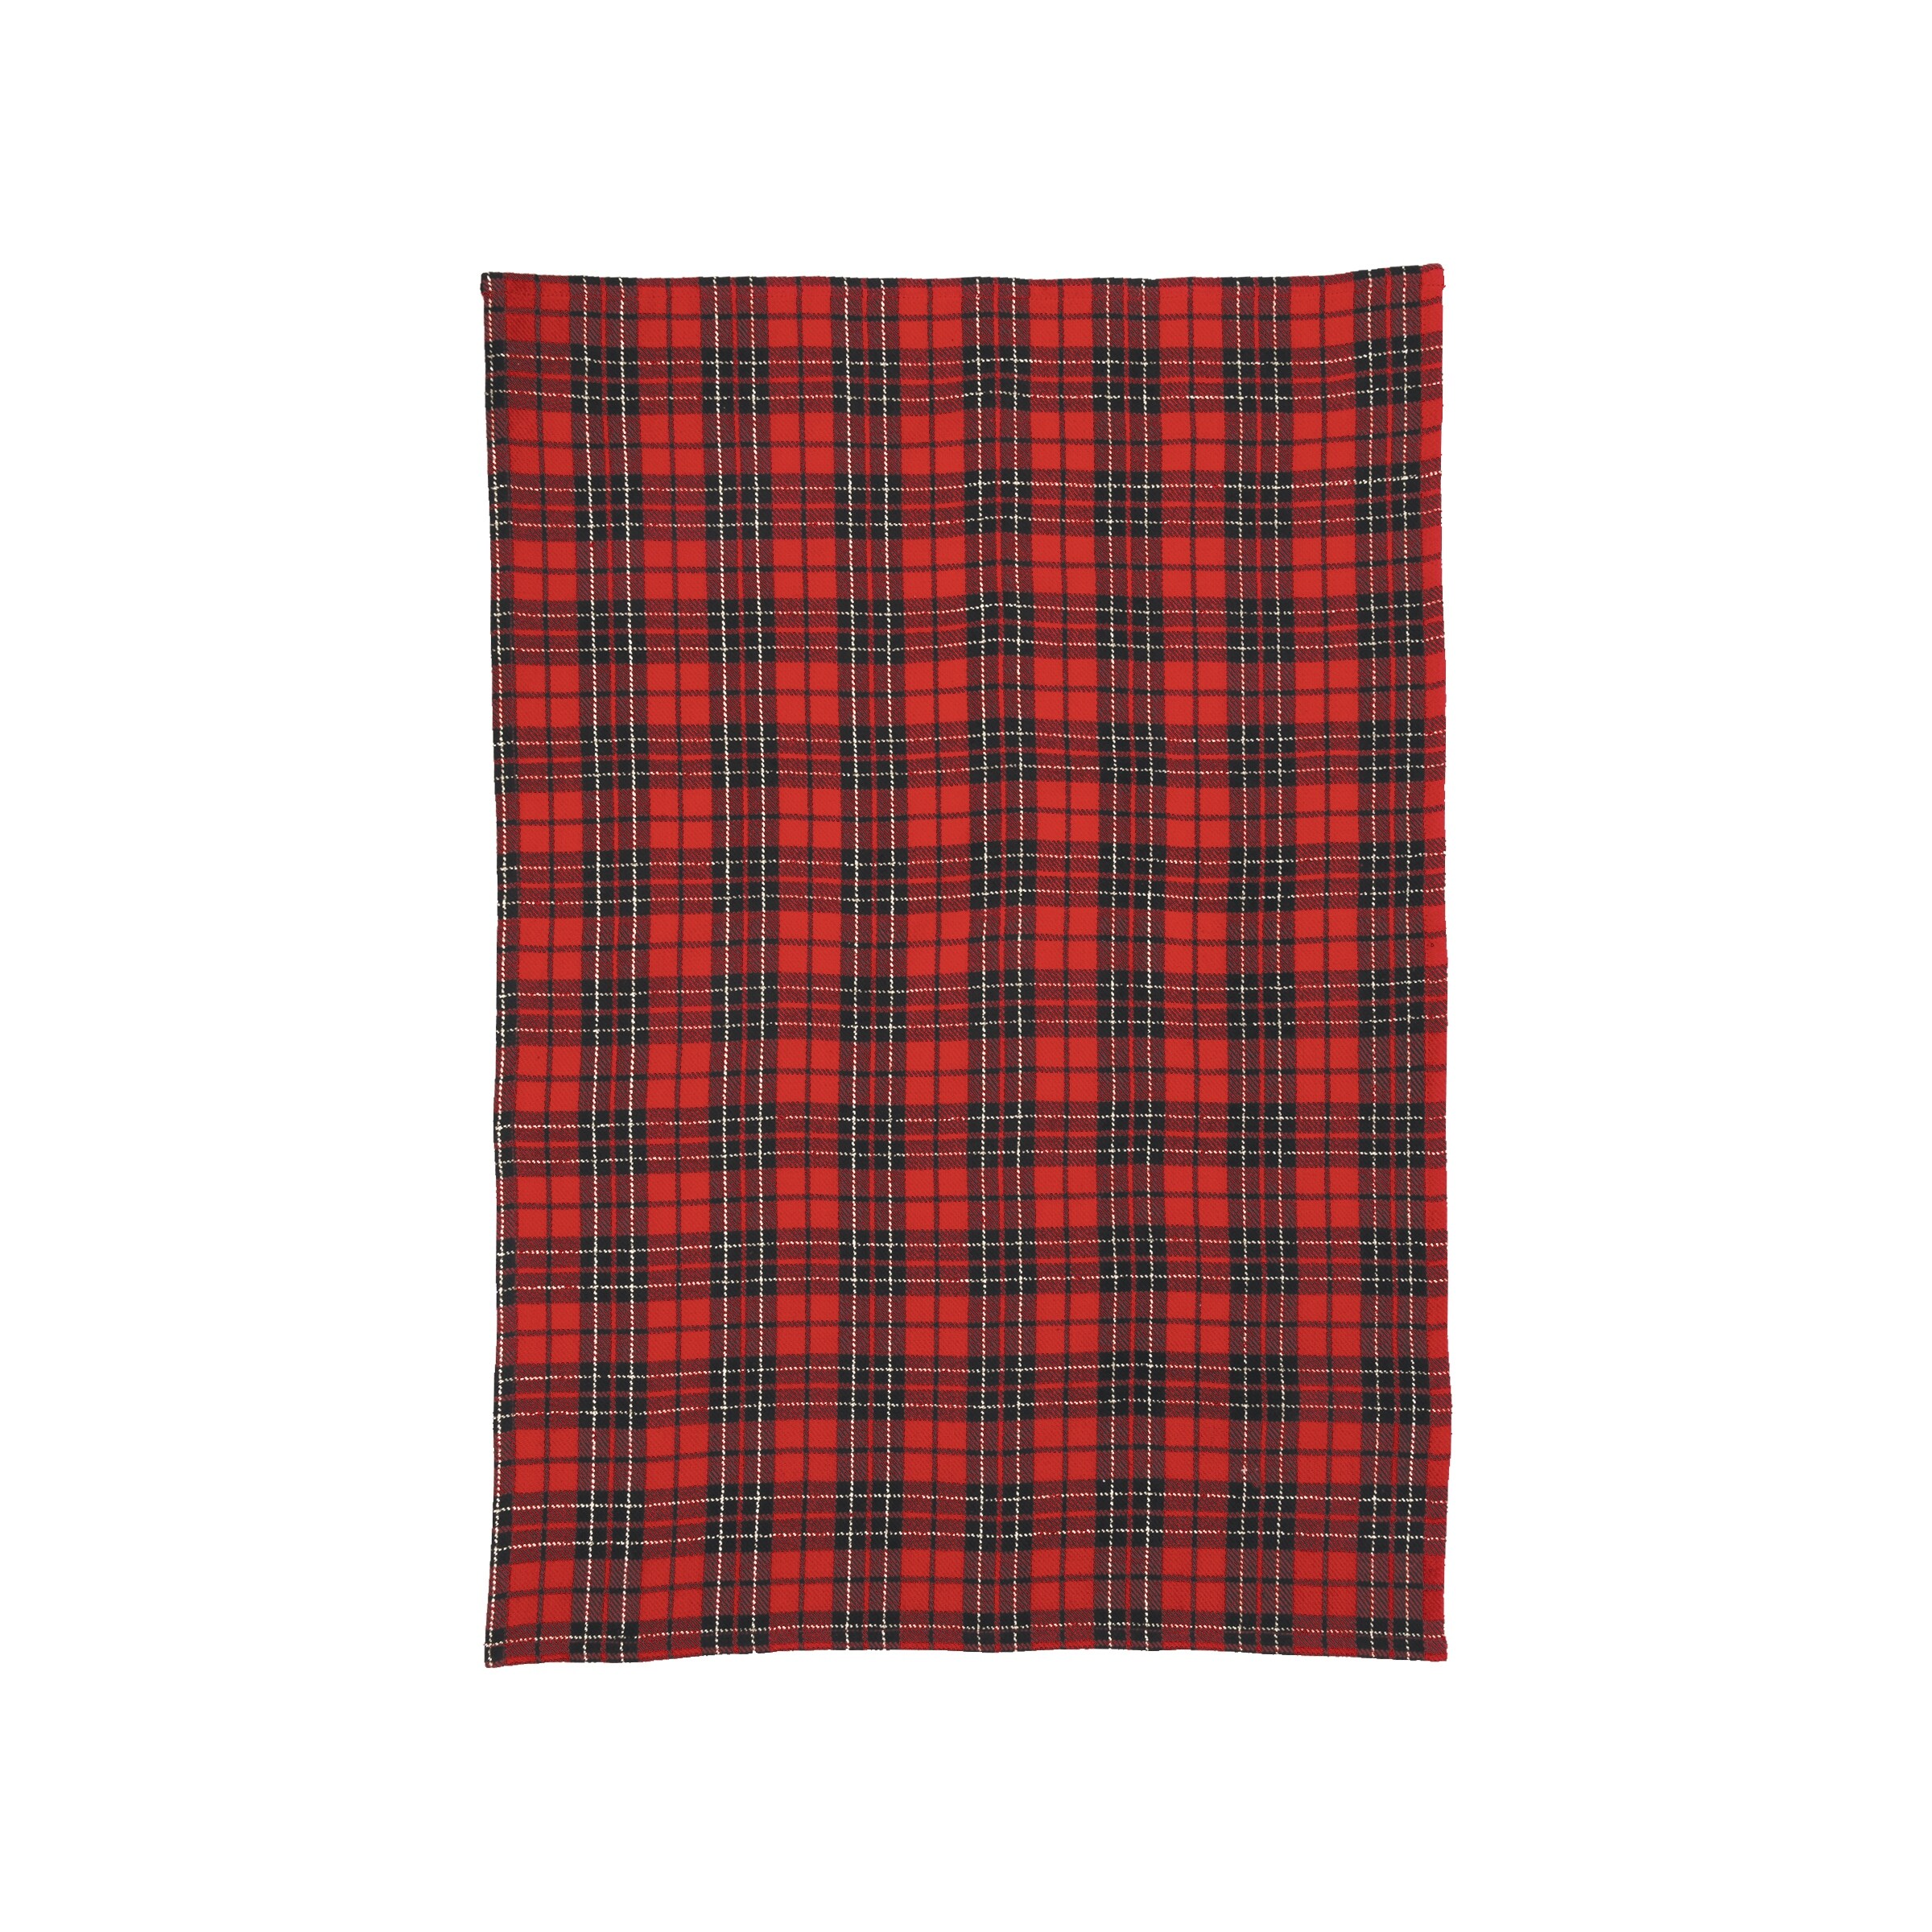 https://ak1.ostkcdn.com/images/products/is/images/direct/c9be8581fb830a33df2051735df5a8138979ab71/Red-Black-Plaid-Woven-Kitchen-Towel.jpg